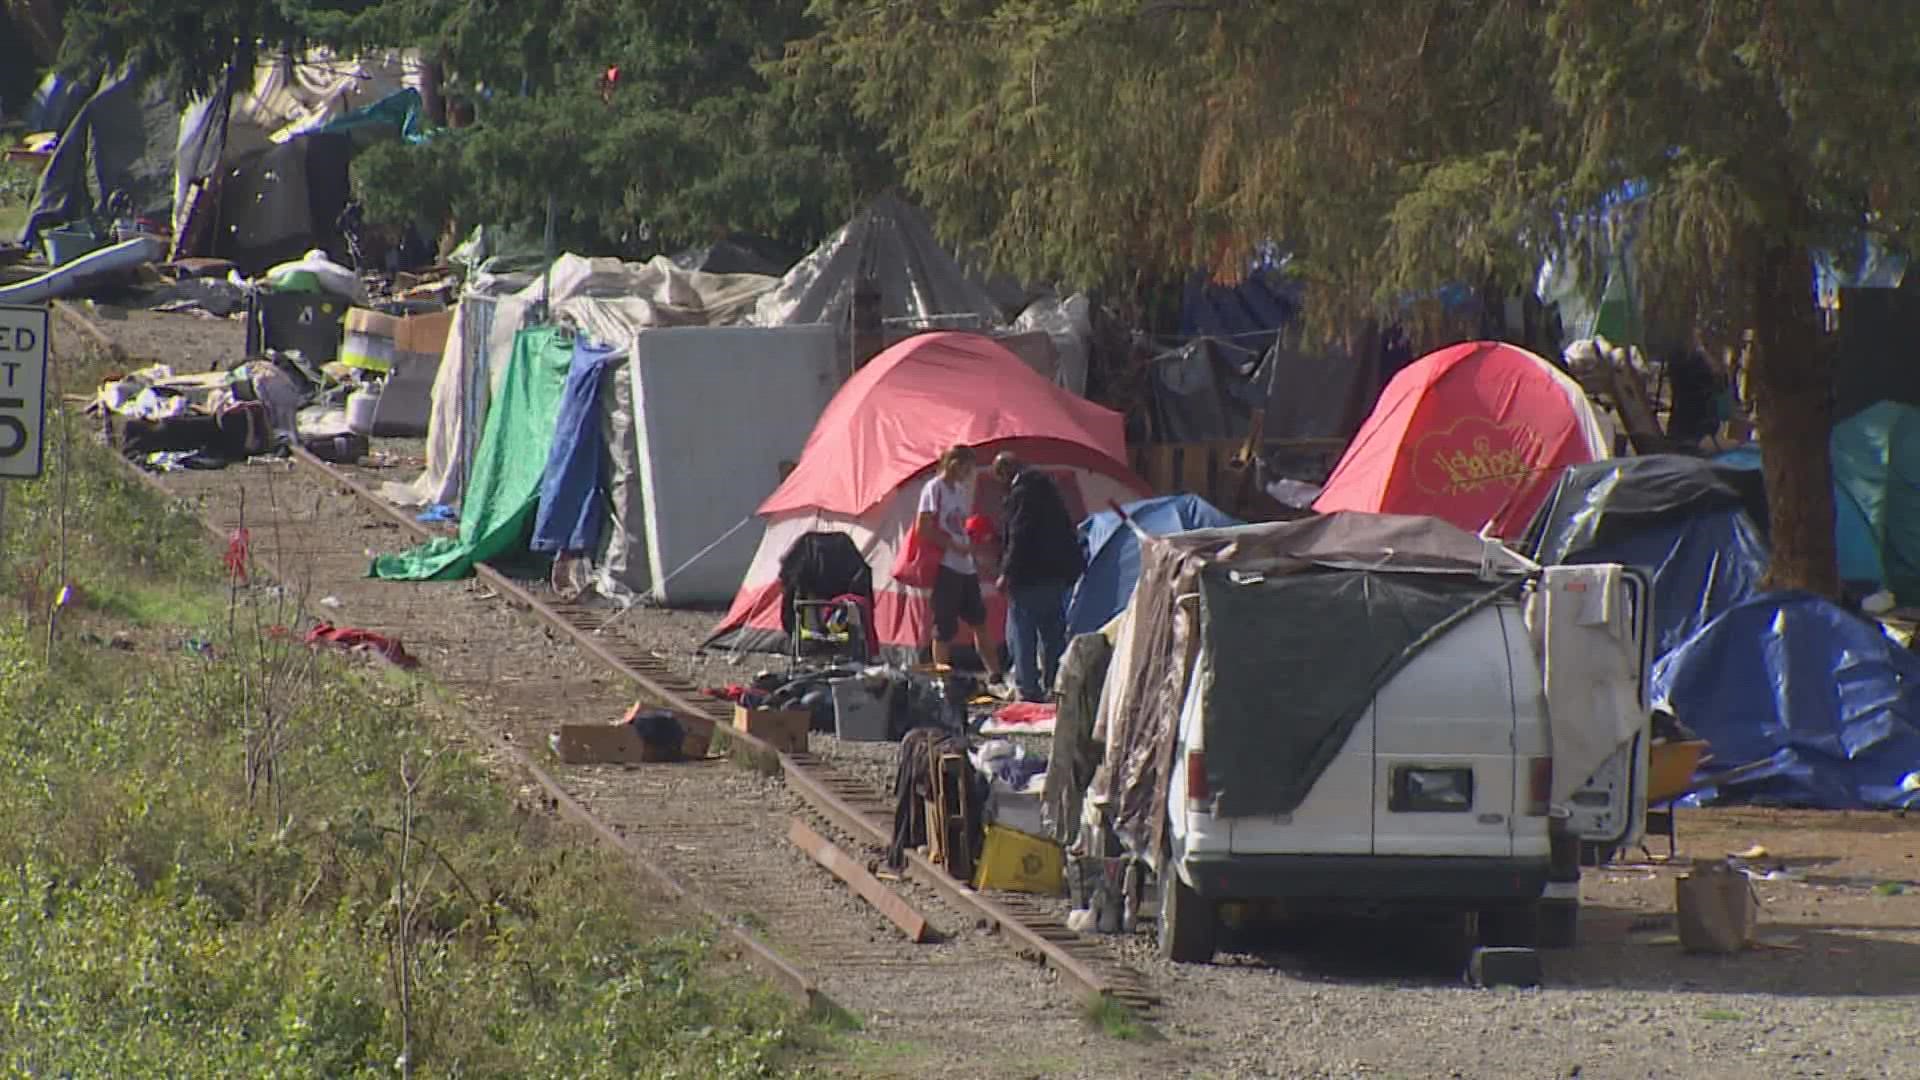 An Olympia man says residents of a nearby homeless encampment have used his water, electricity and someone broke into his home.